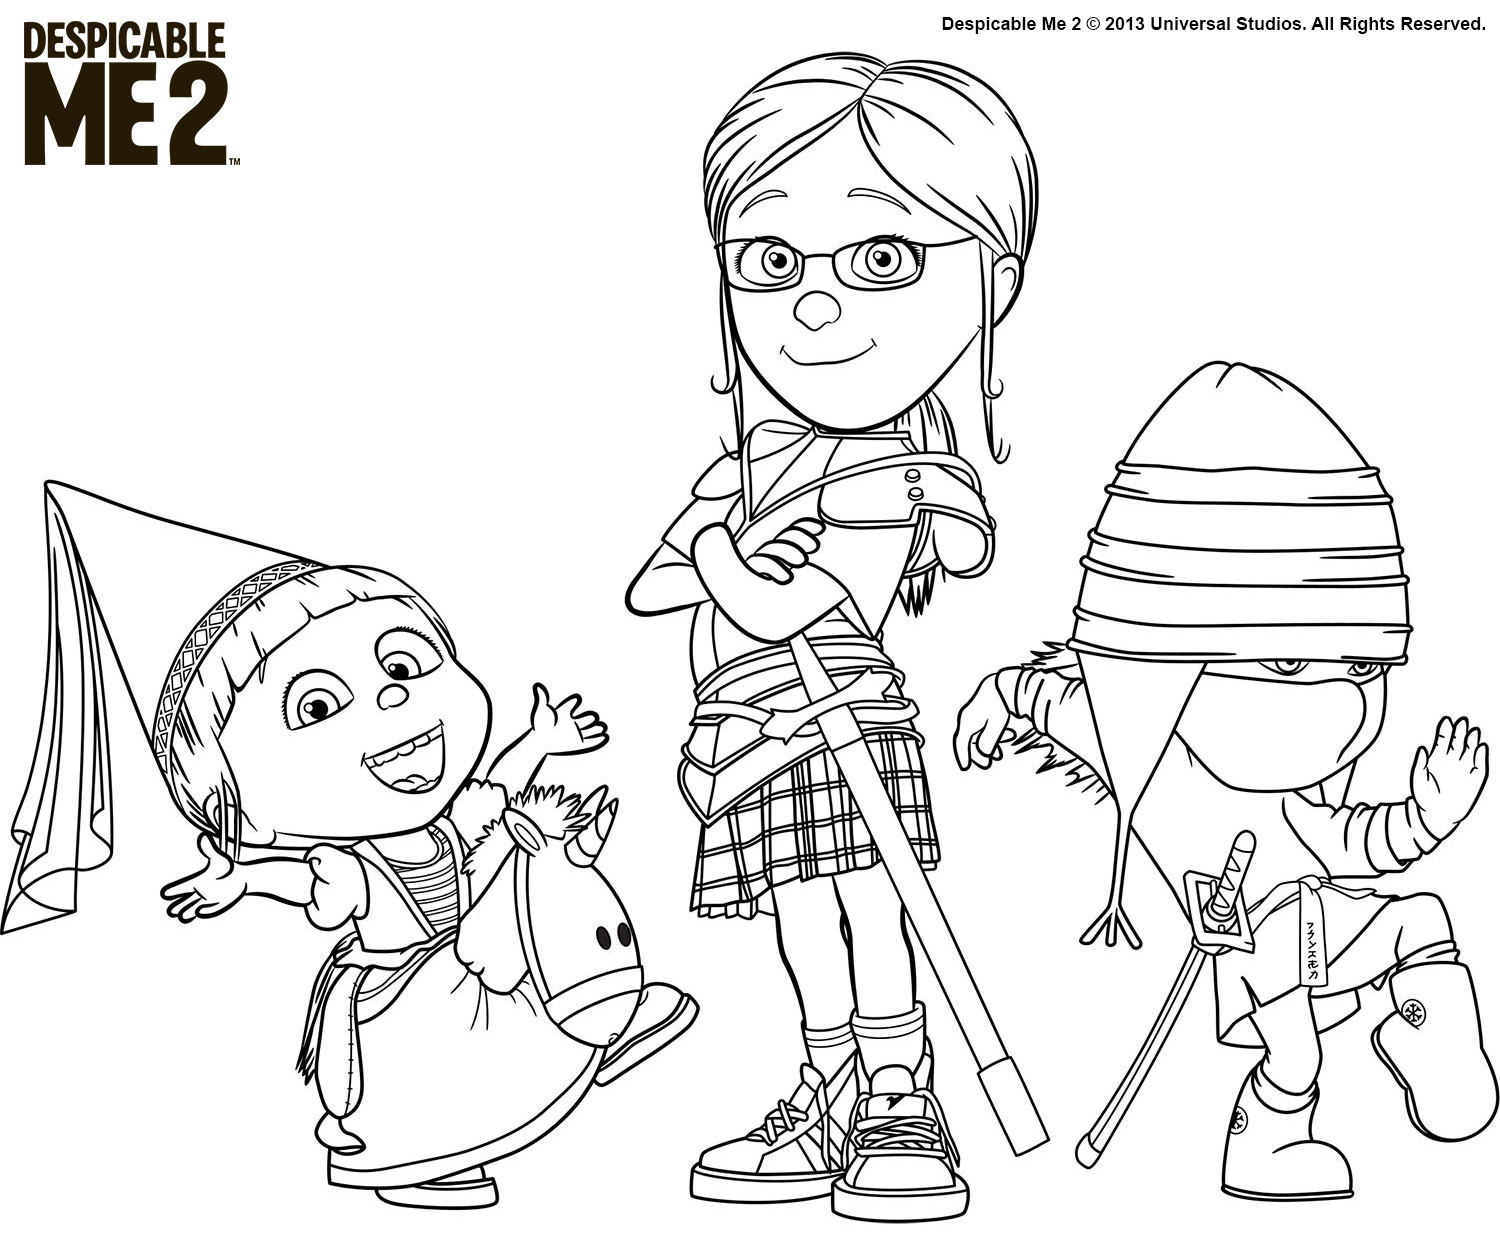 Despicable me coloring pages download and print for free